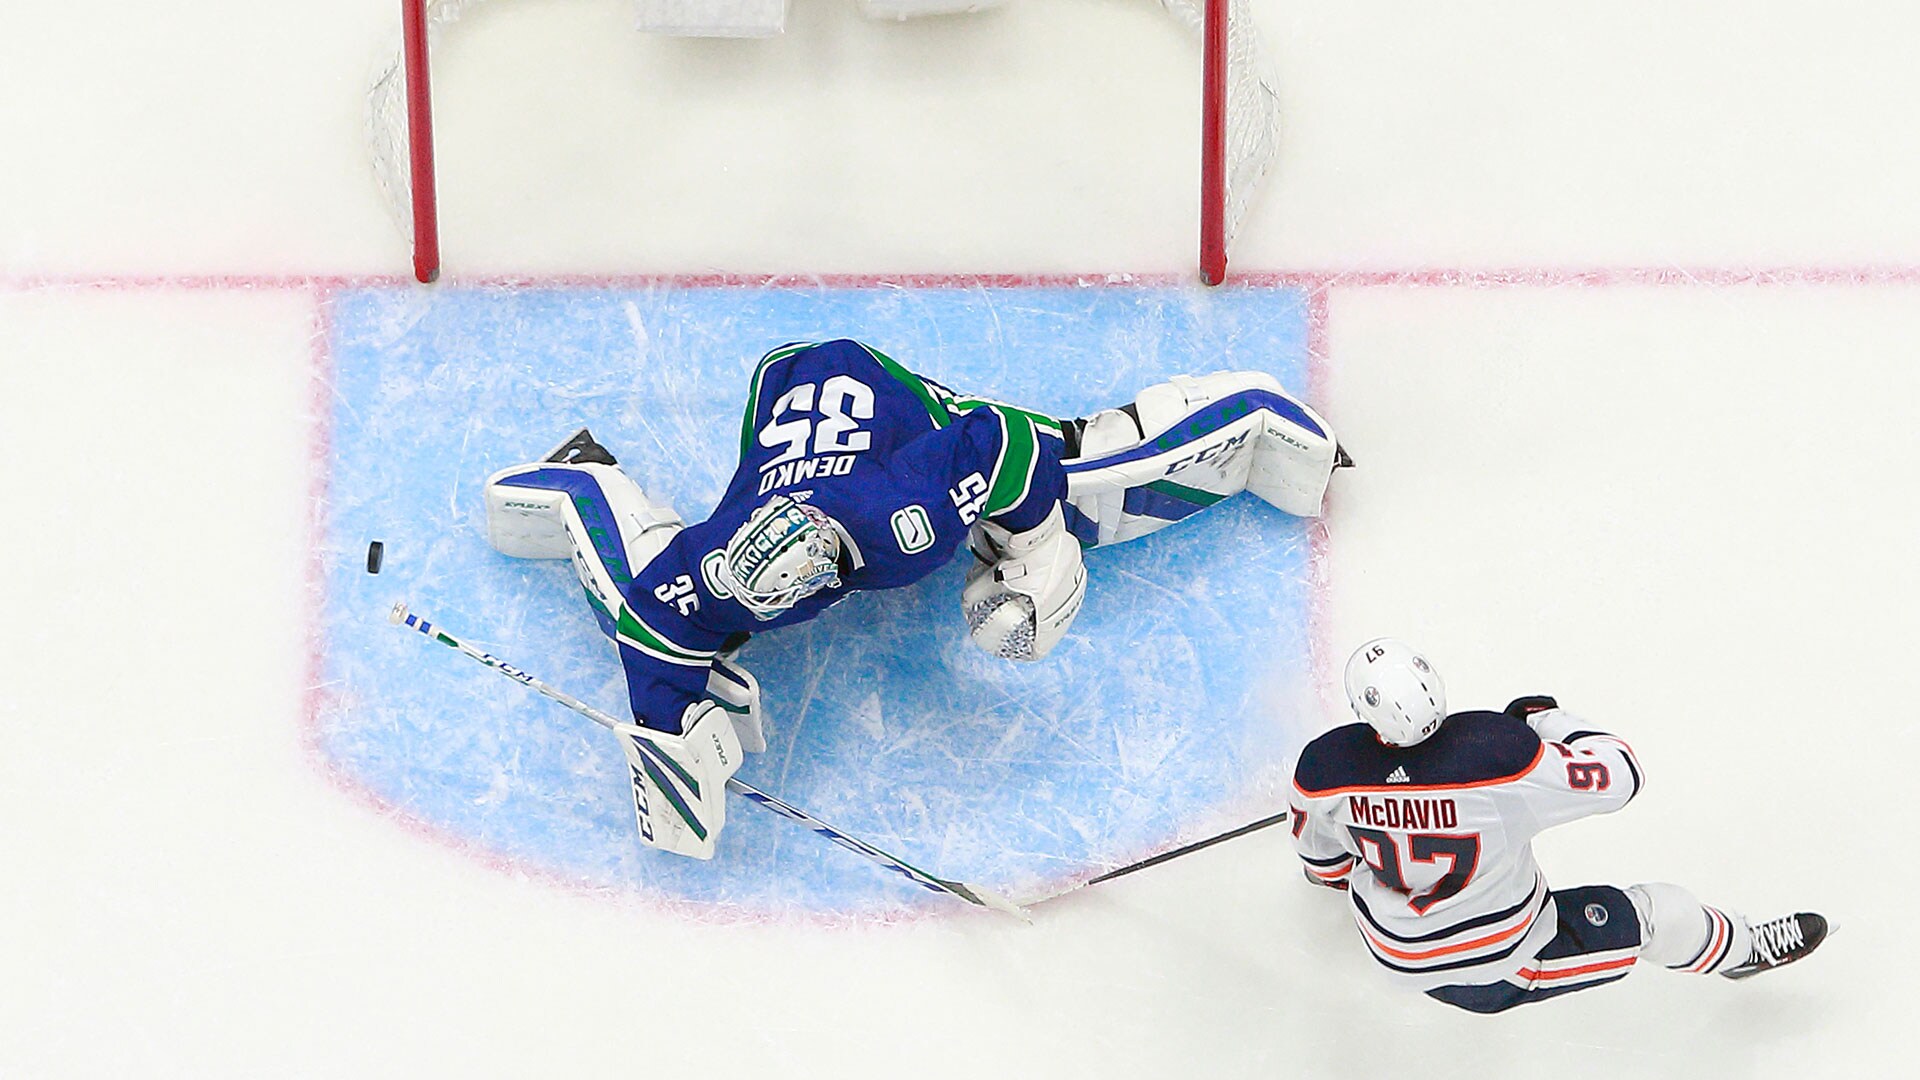 Stanley Cup Playoffs: Canucks Ride Demko Shutout to Force Game 7